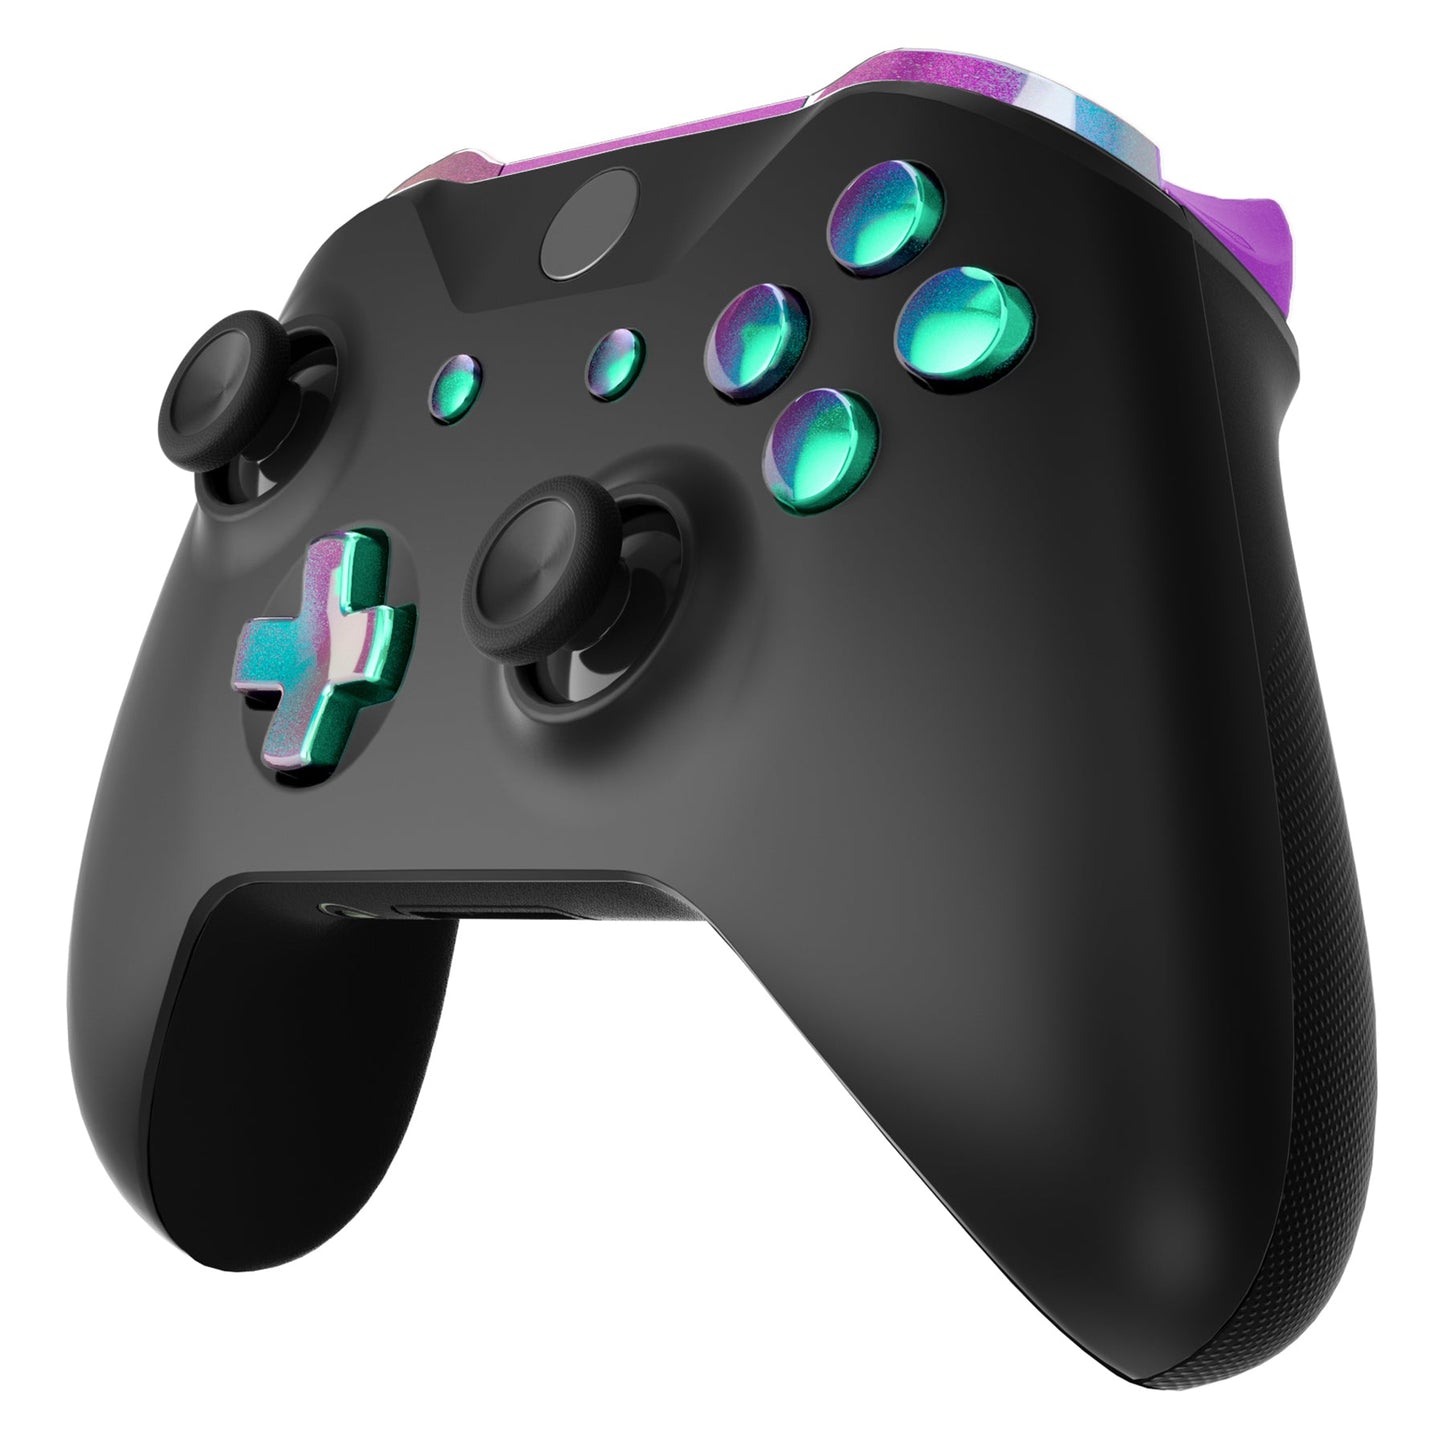 eXtremeRate Retail LB RB LT RT Bumpers Triggers D-Pad ABXY Start Back Sync Buttons, Chameleon Green Purple Full Set Buttons Repair Kits with Tools for Xbox One S X Controller (Model 1708) - SXOJ0222